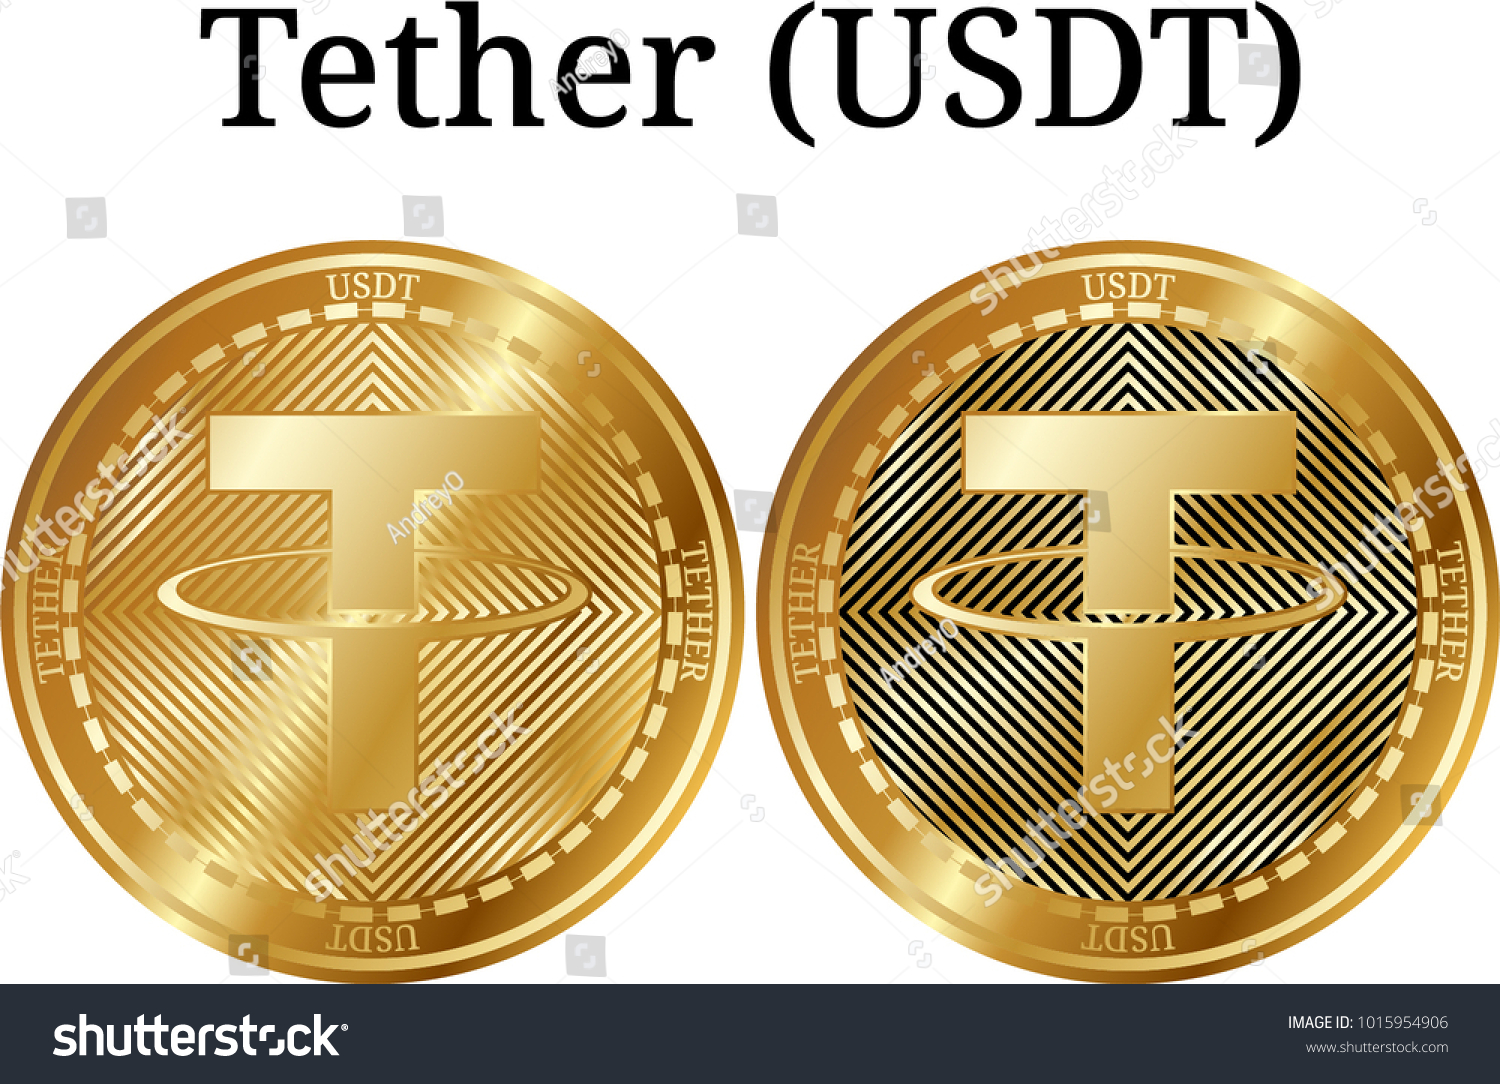 Tether coin